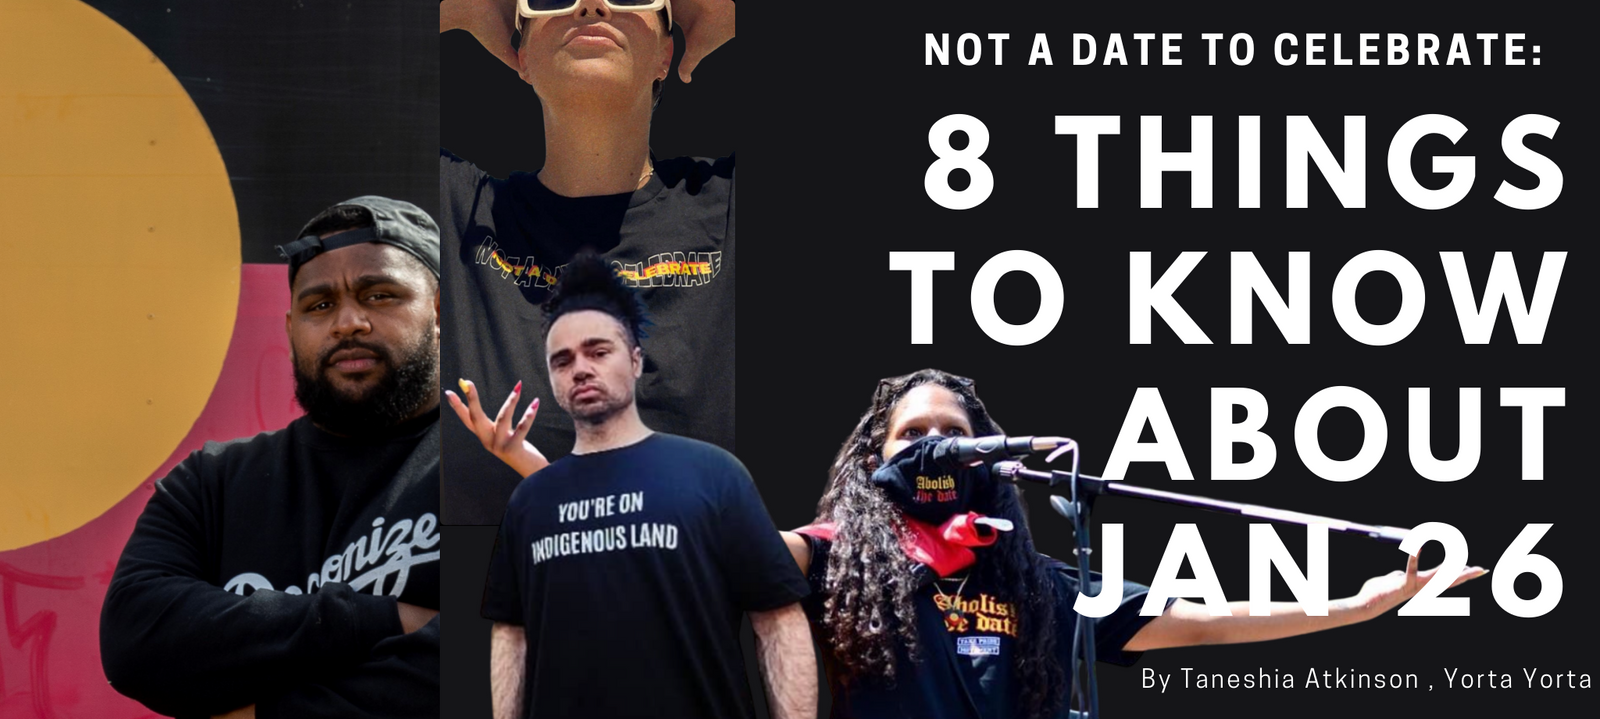 8 things you need to know about Jan 26 Clothing The Gap blog by Taniesha Atkinson